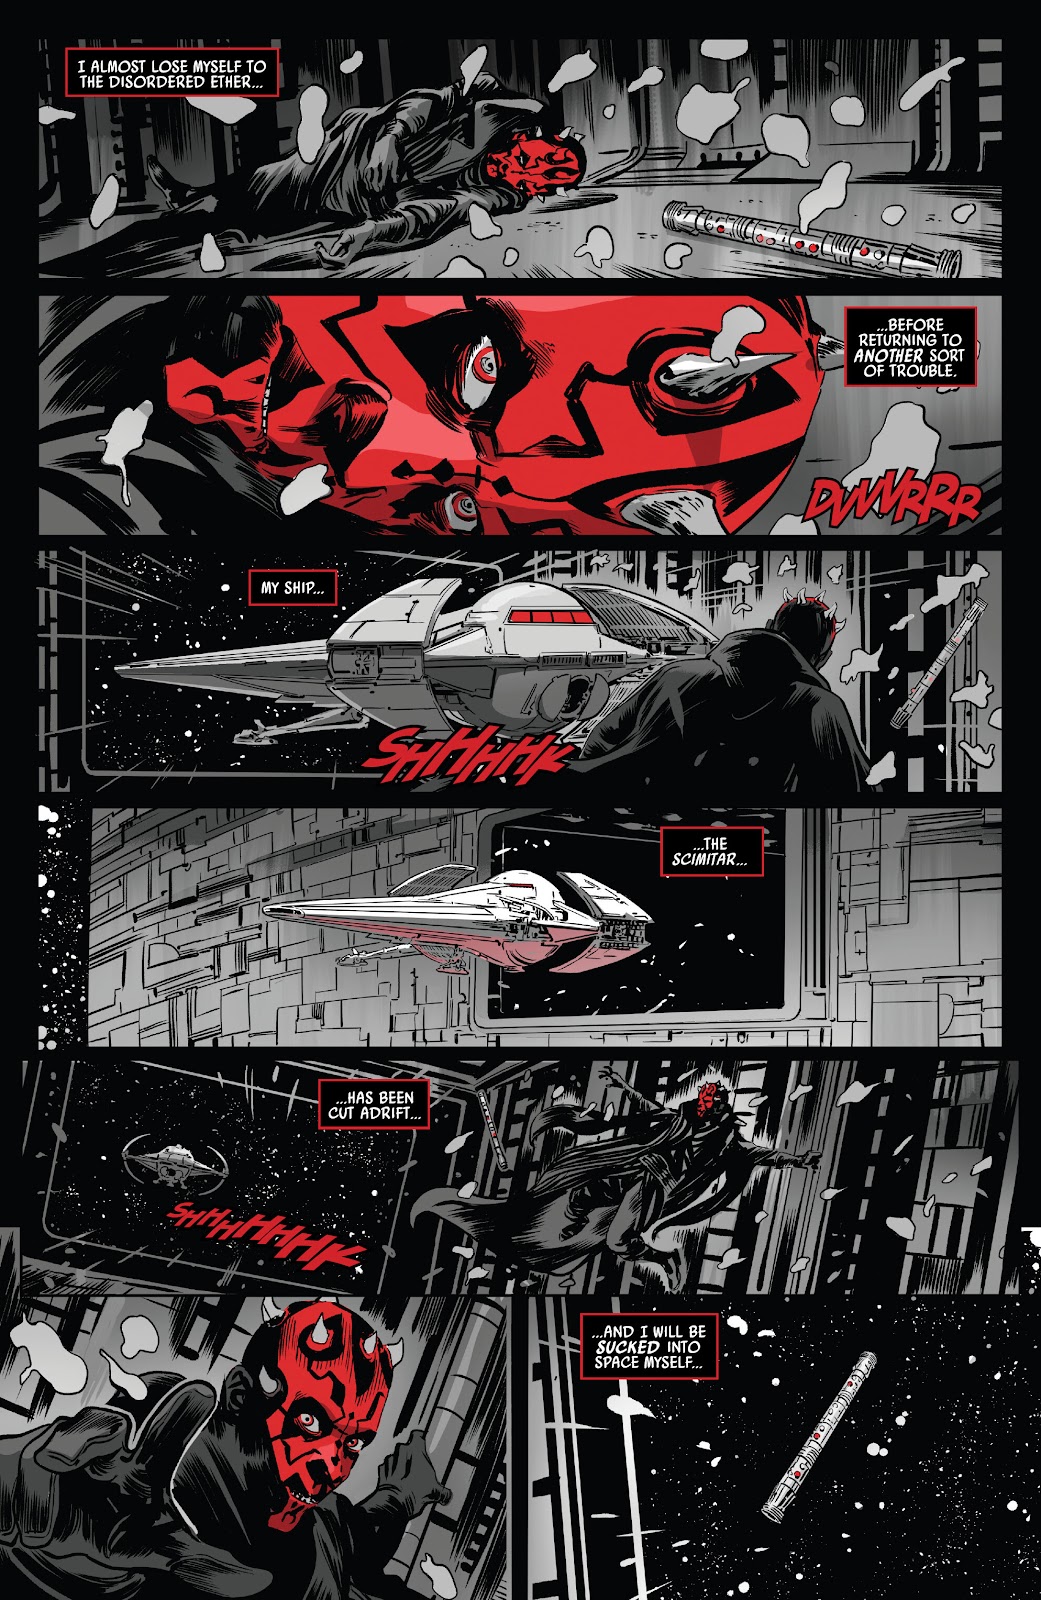 Star Wars: Darth Maul - Black, White & Red issue 1 - Page 10